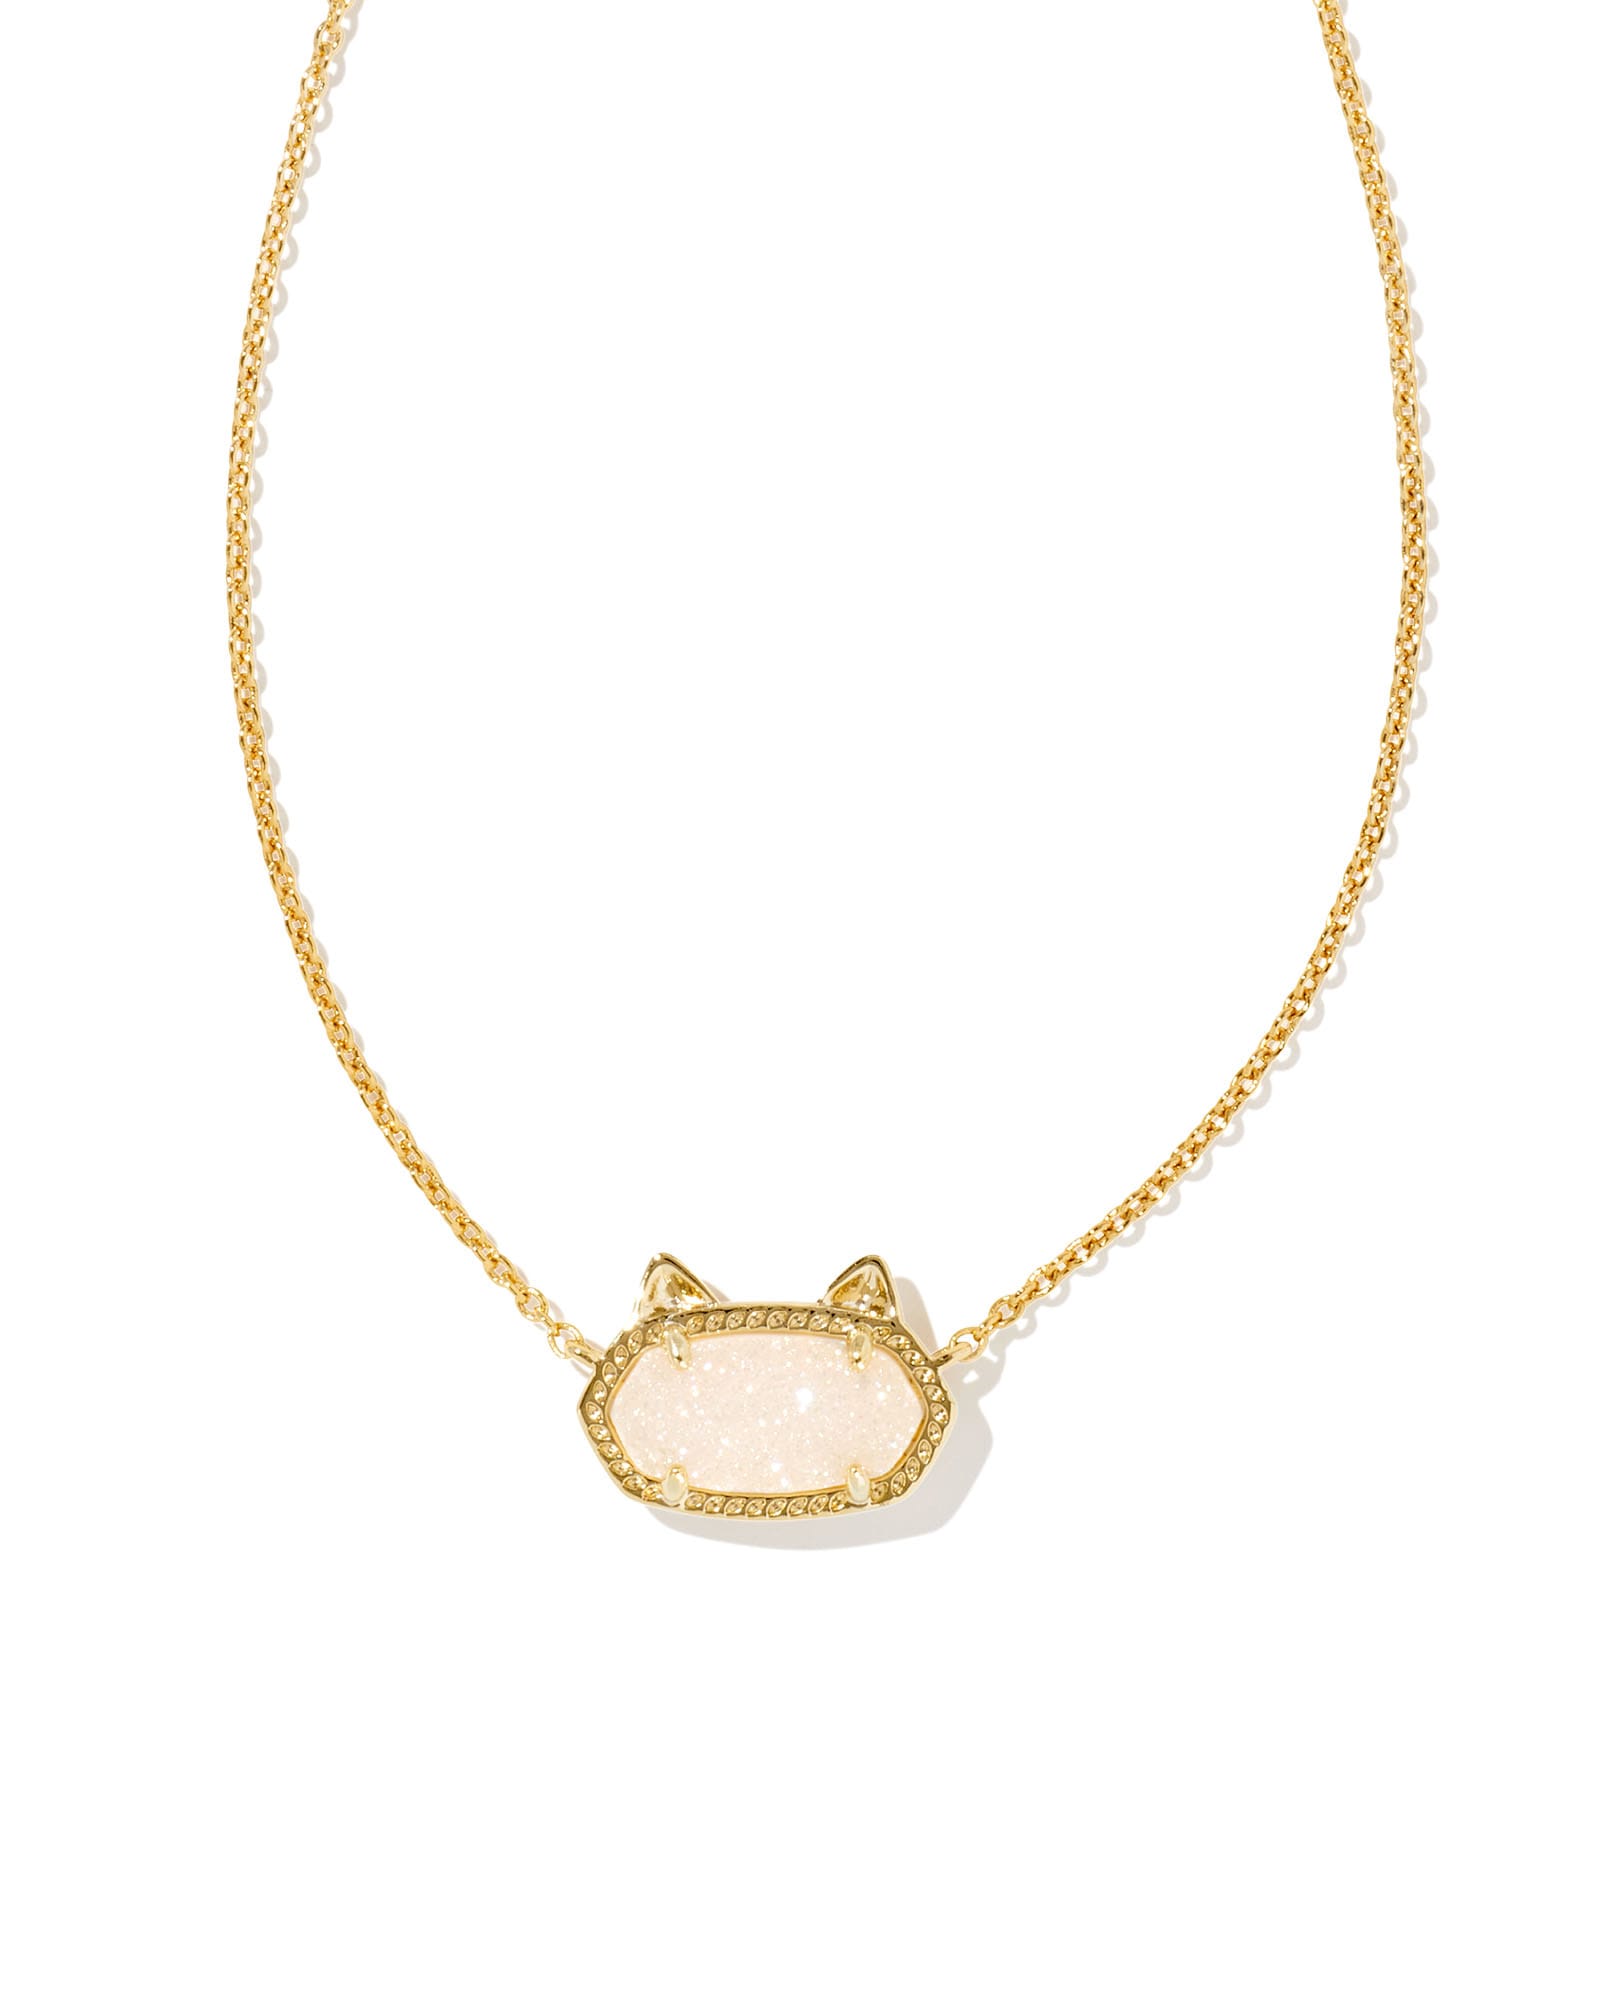 Supper Cute Dog Neck Chain Gold Color/ Jewelry for Pet 